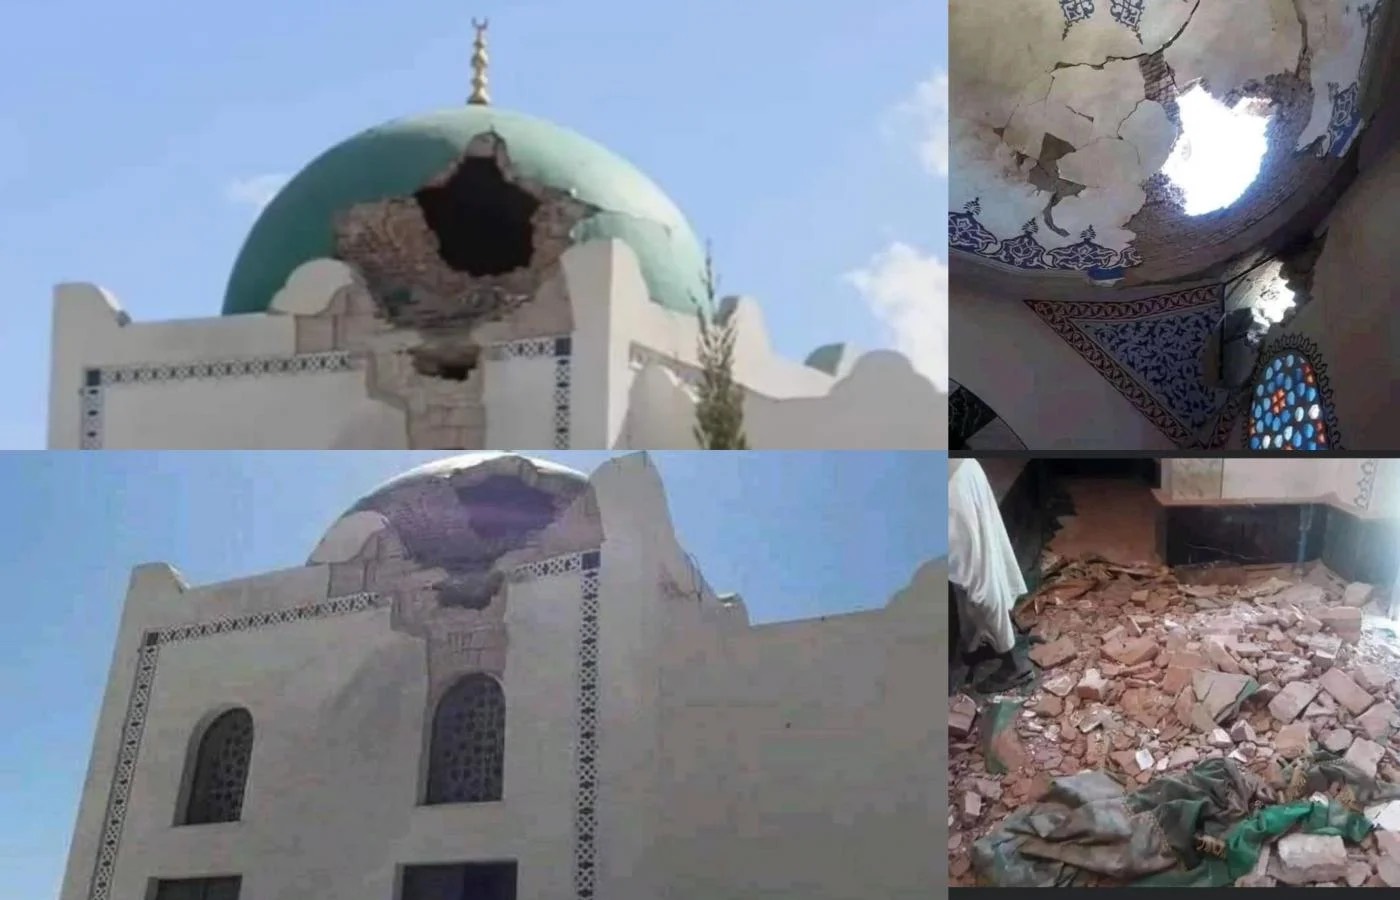 Images emerged on 1 January 2021 showing damage reportedly inflicted on the seventh-century al-Nejashi mosque in November in Ethiopia's Tigray region